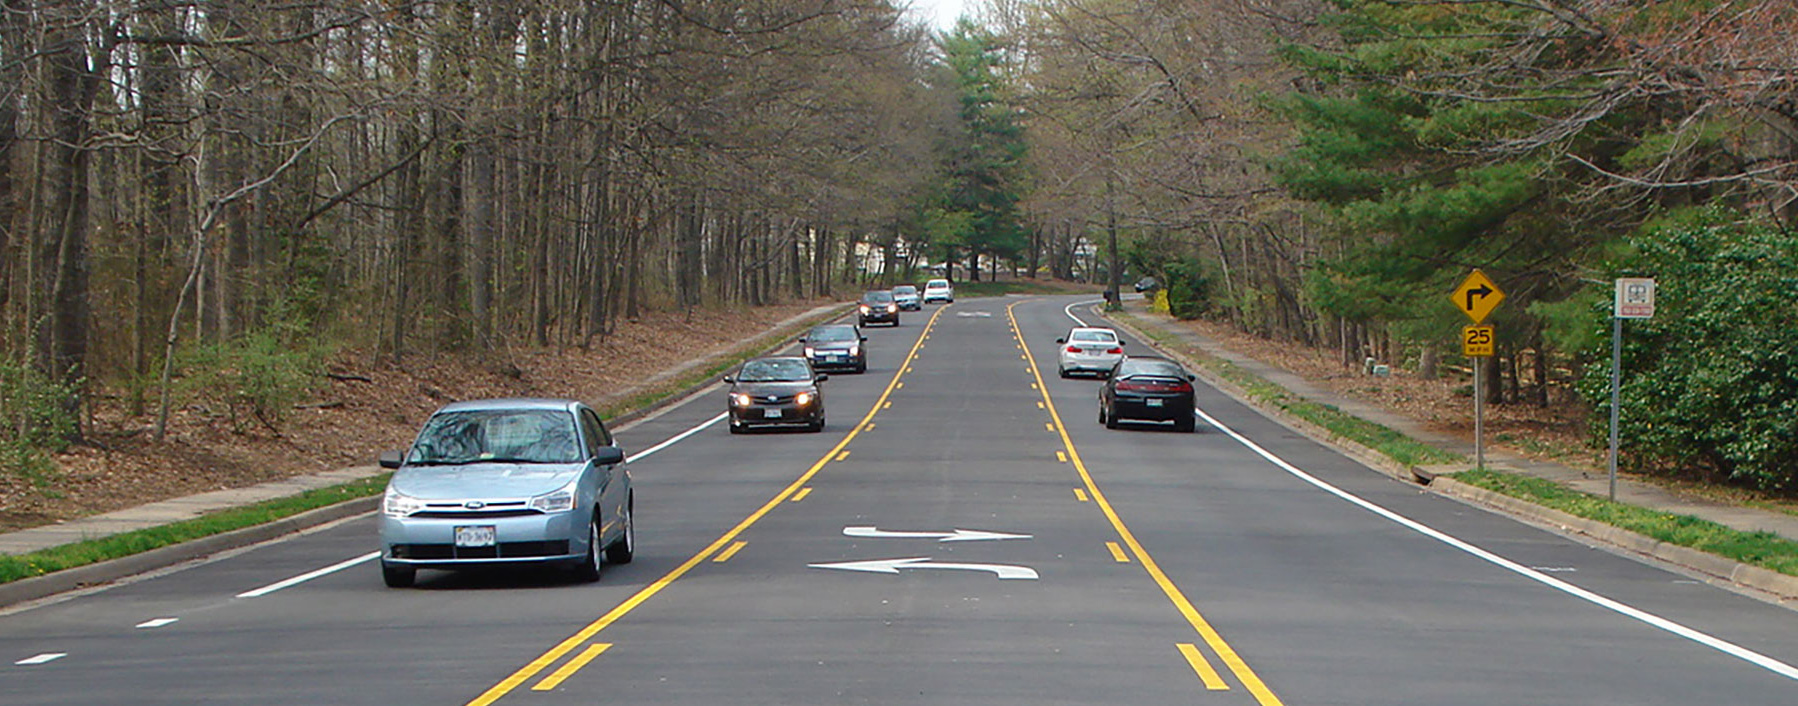 Two lane road with middle turn lanes